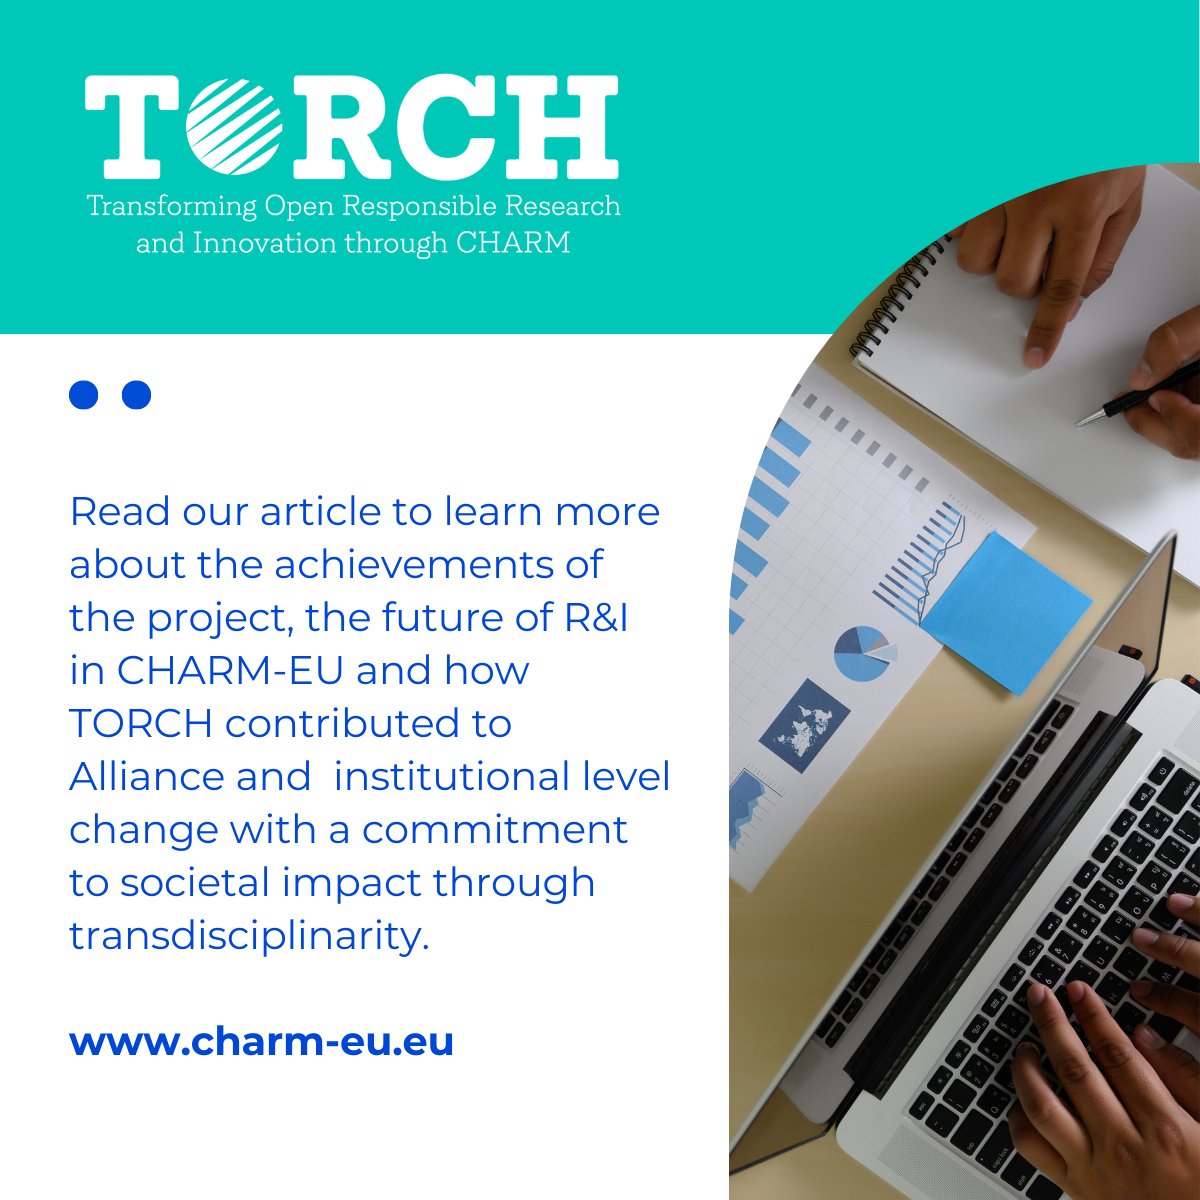 Developing the R&I dimension of CHARM-EU, our TORCH project was successfully completed. 🎉 Learn more about: ✅ the results of the project ✅ its contribution to societal, Alliance-level and institutional changes ✅ the future of R&I within CHARM-EU 🔗 bit.ly/44Ed2sX